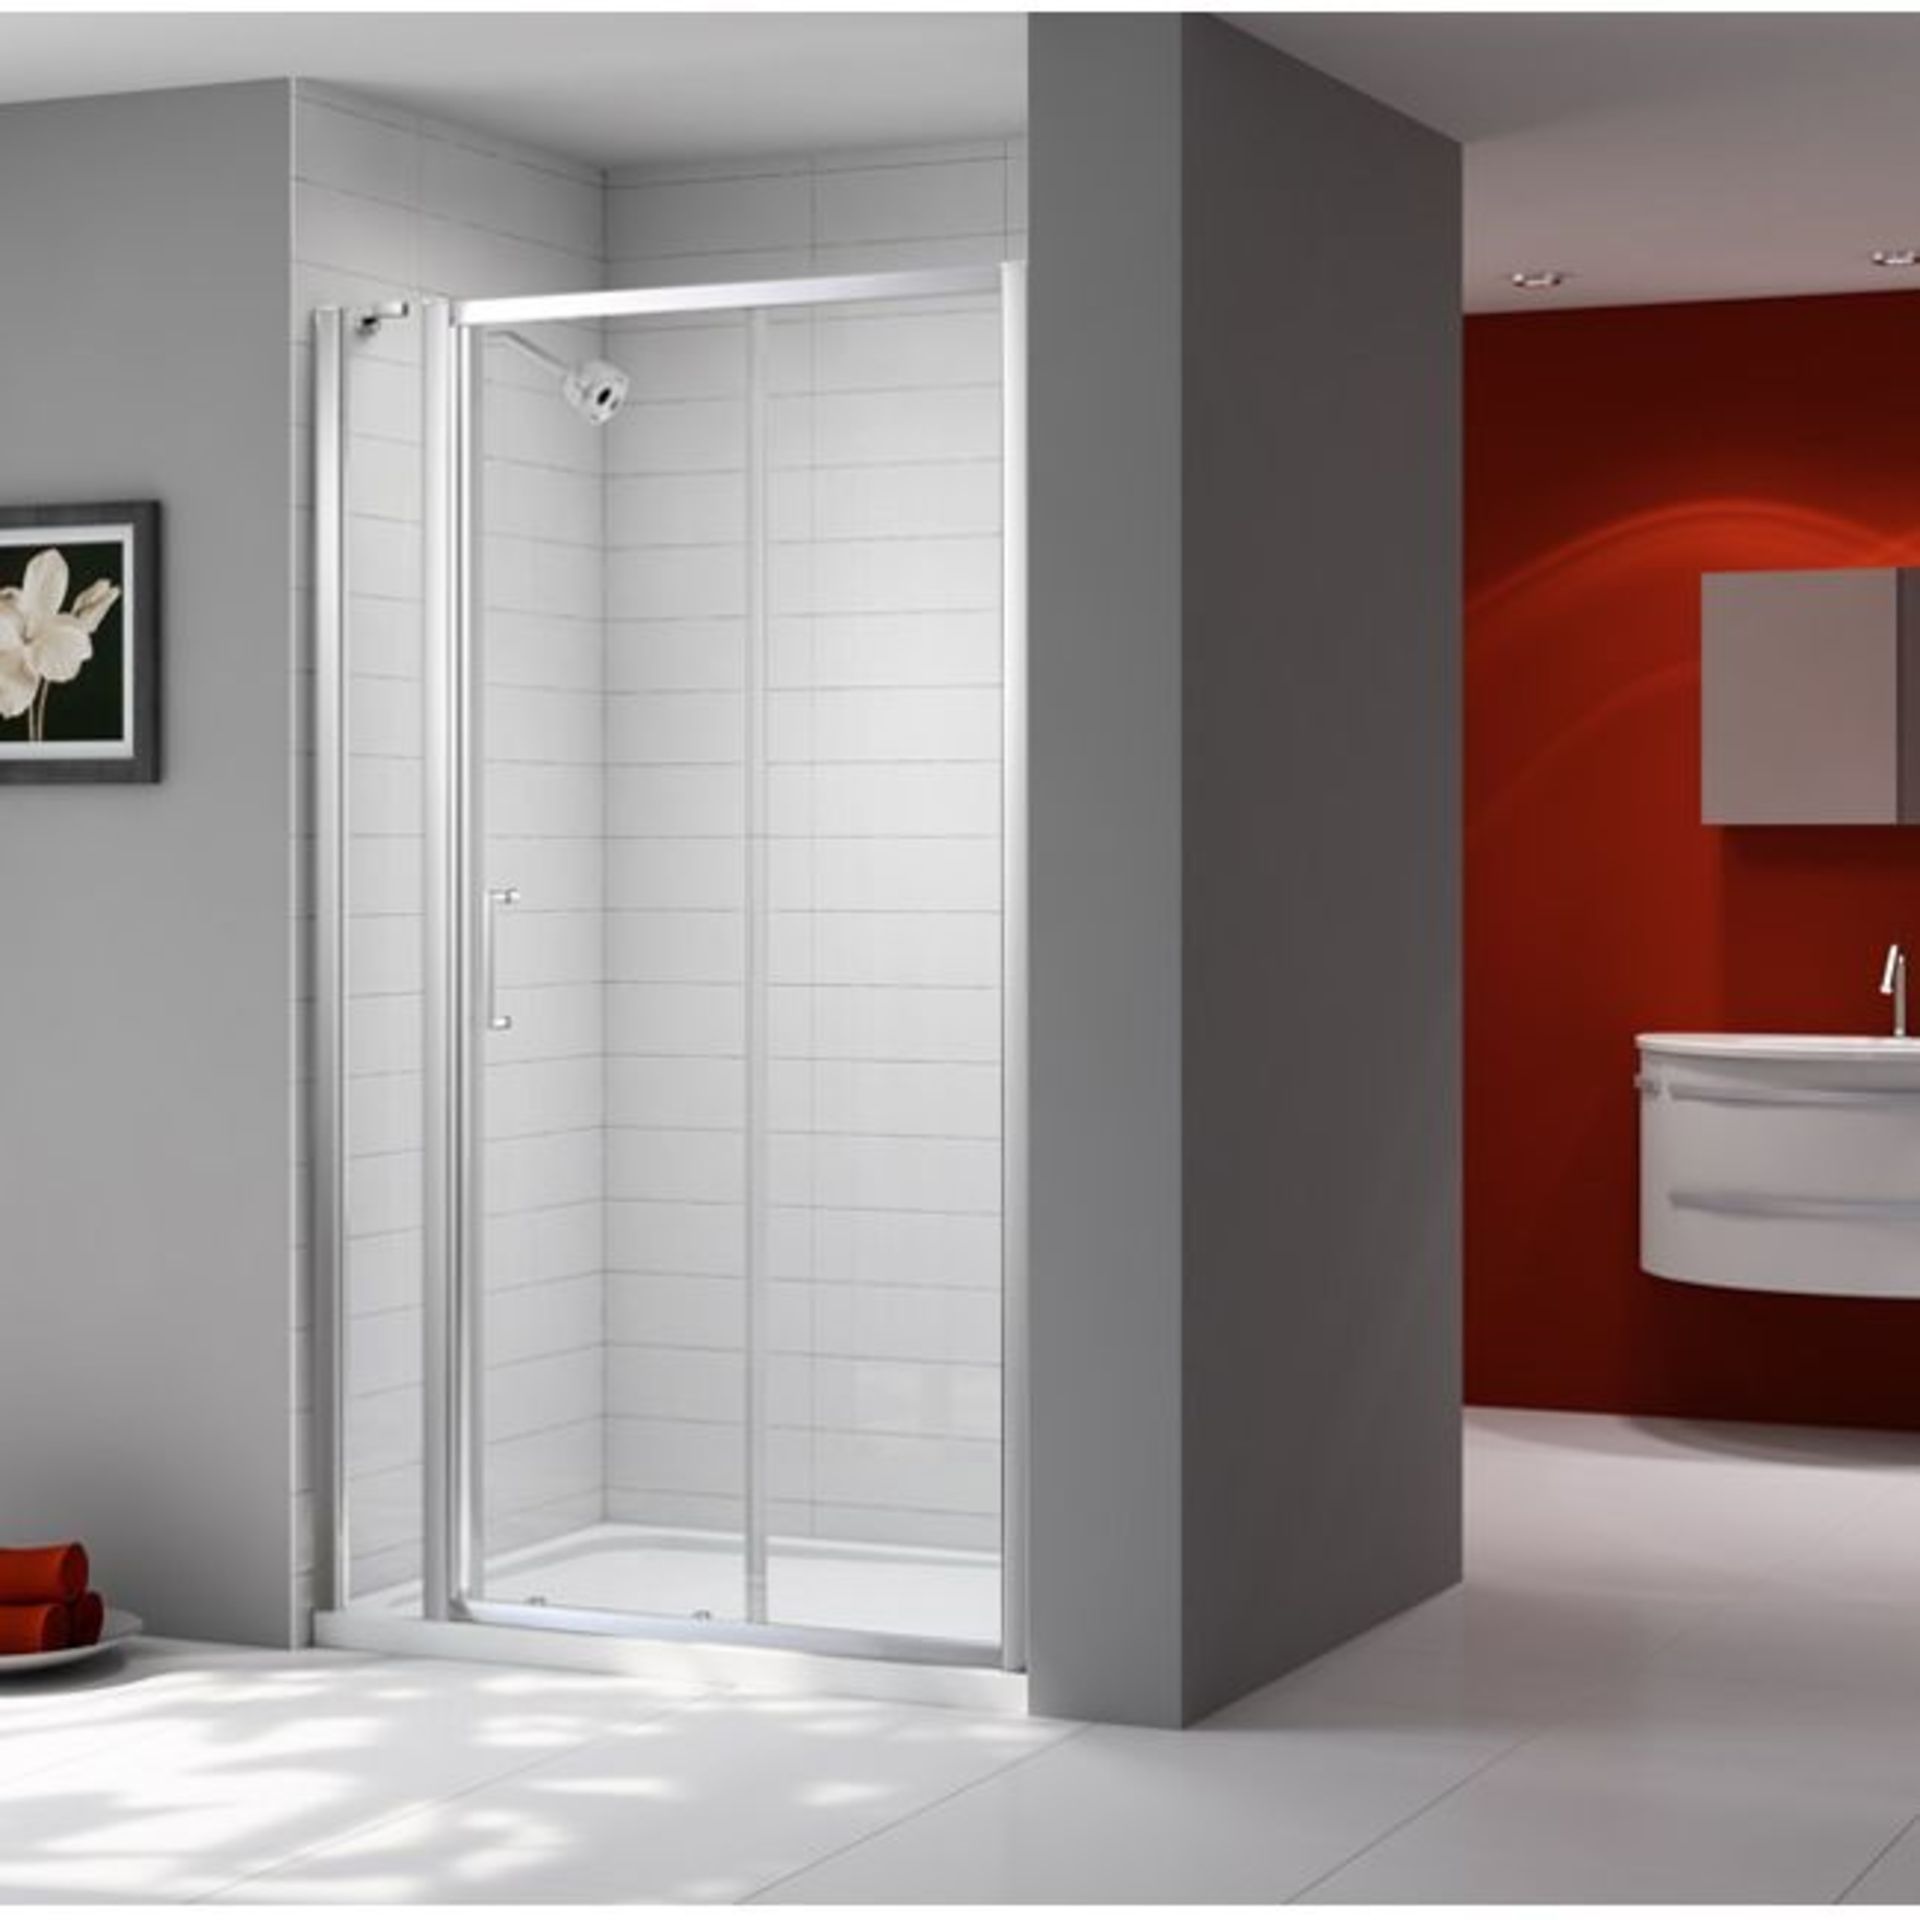 New (U205) 210mm In Line Panel, 1900mm Chrome & Clear Glass, Reversible.